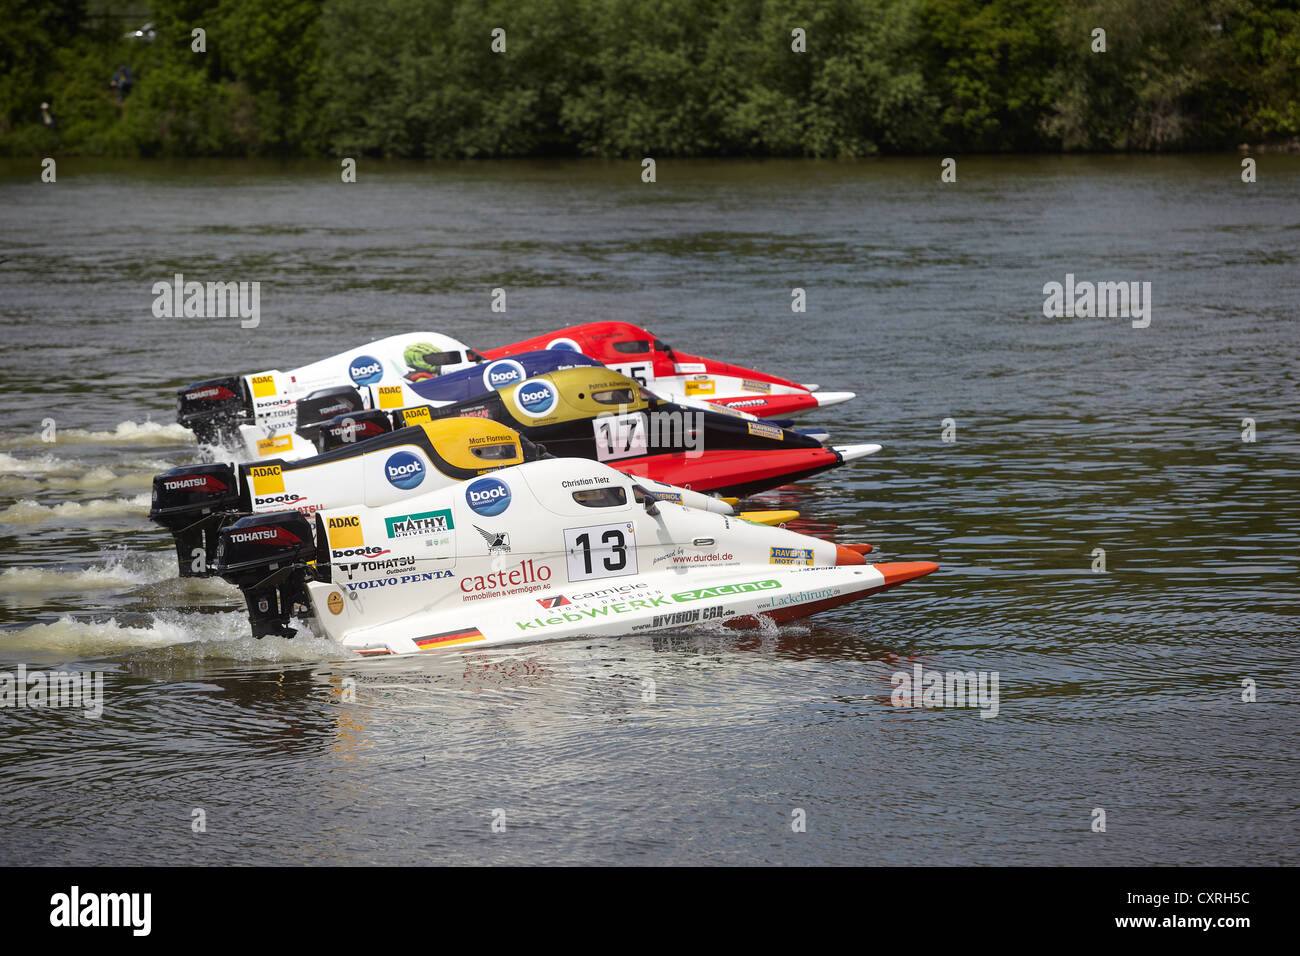 ADAC, German automobile club, motor boat race on the Moselle River, Brodenbach 2012, Rhineland-Palatinate, Germany, Europe Stock Photo